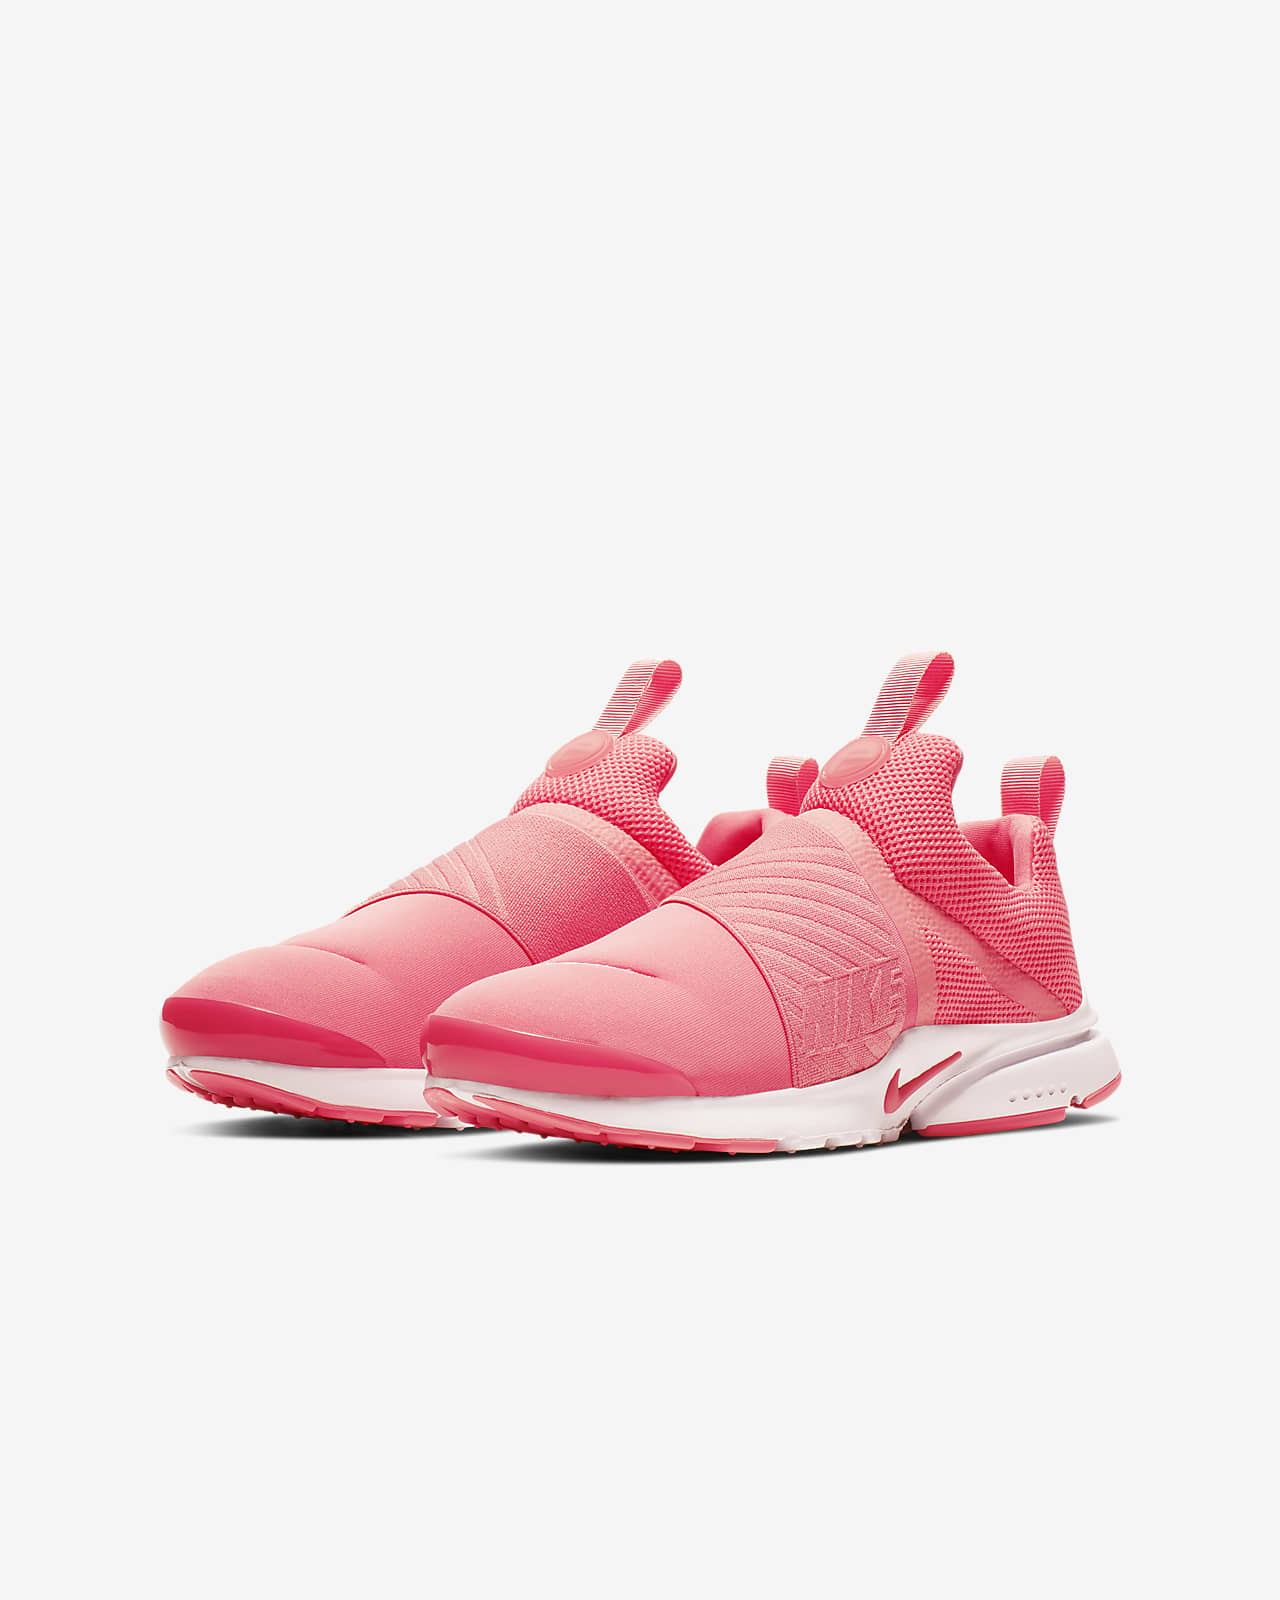 nike presto extreme running shoes for adults